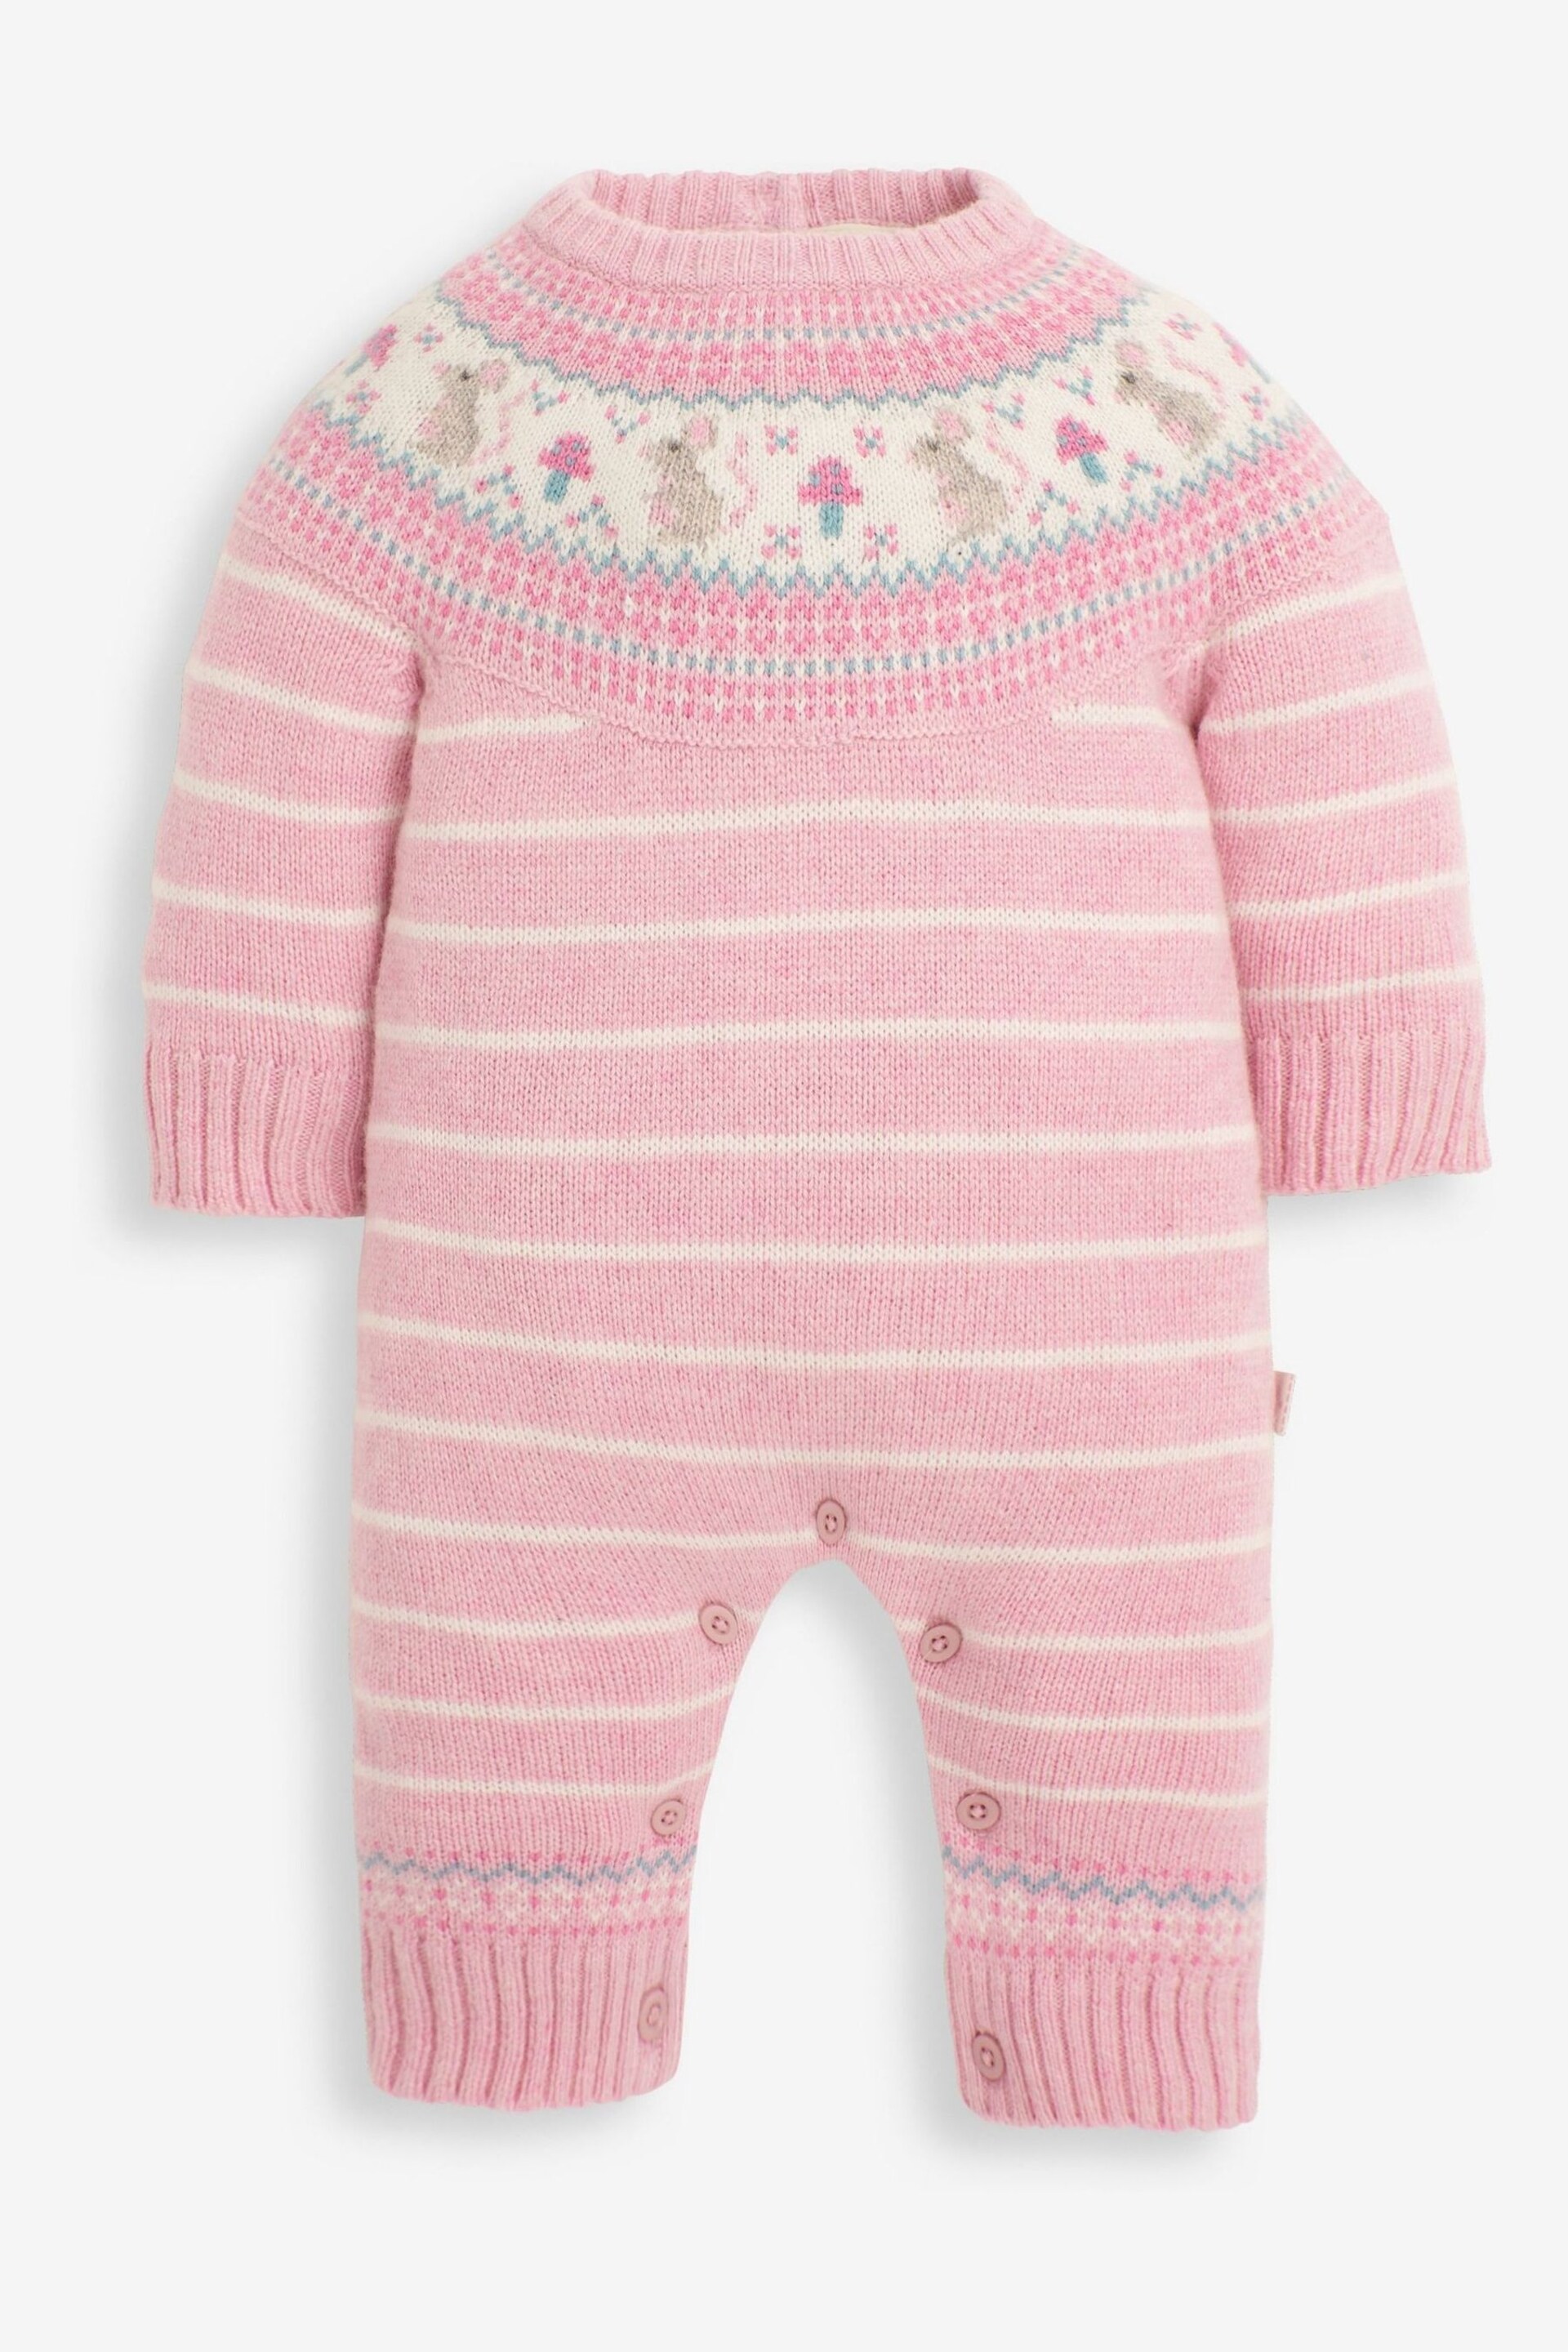 JoJo Maman Bébé Rose Mouse Fair Isle Knitted Baby All-In-One - Image 1 of 2